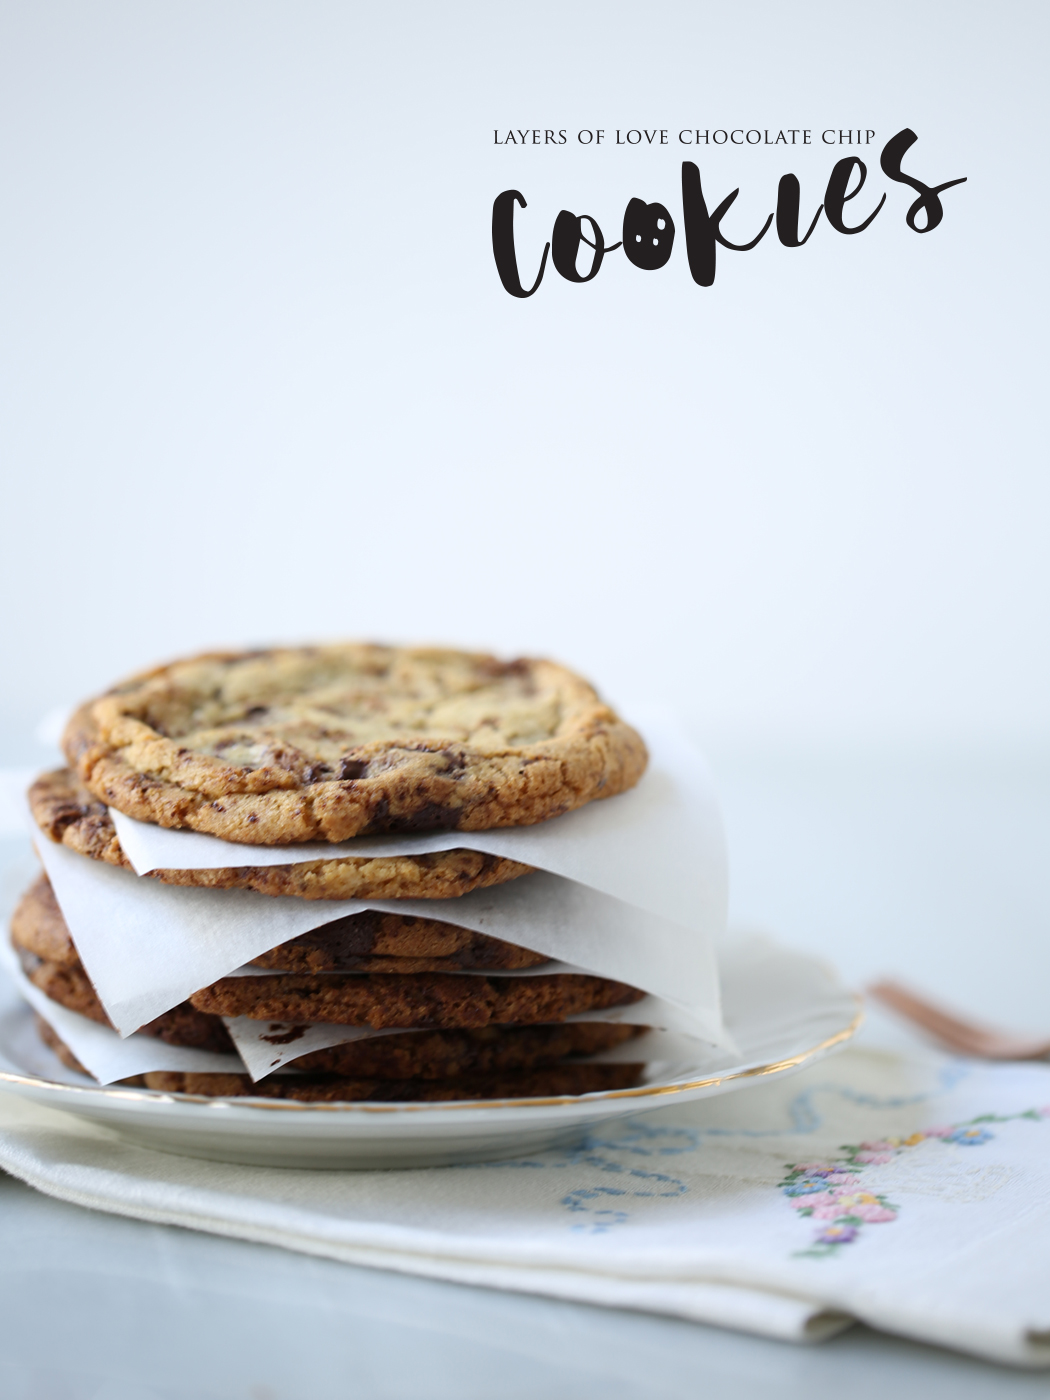 Layers of Love Chocolate Chip Cookies